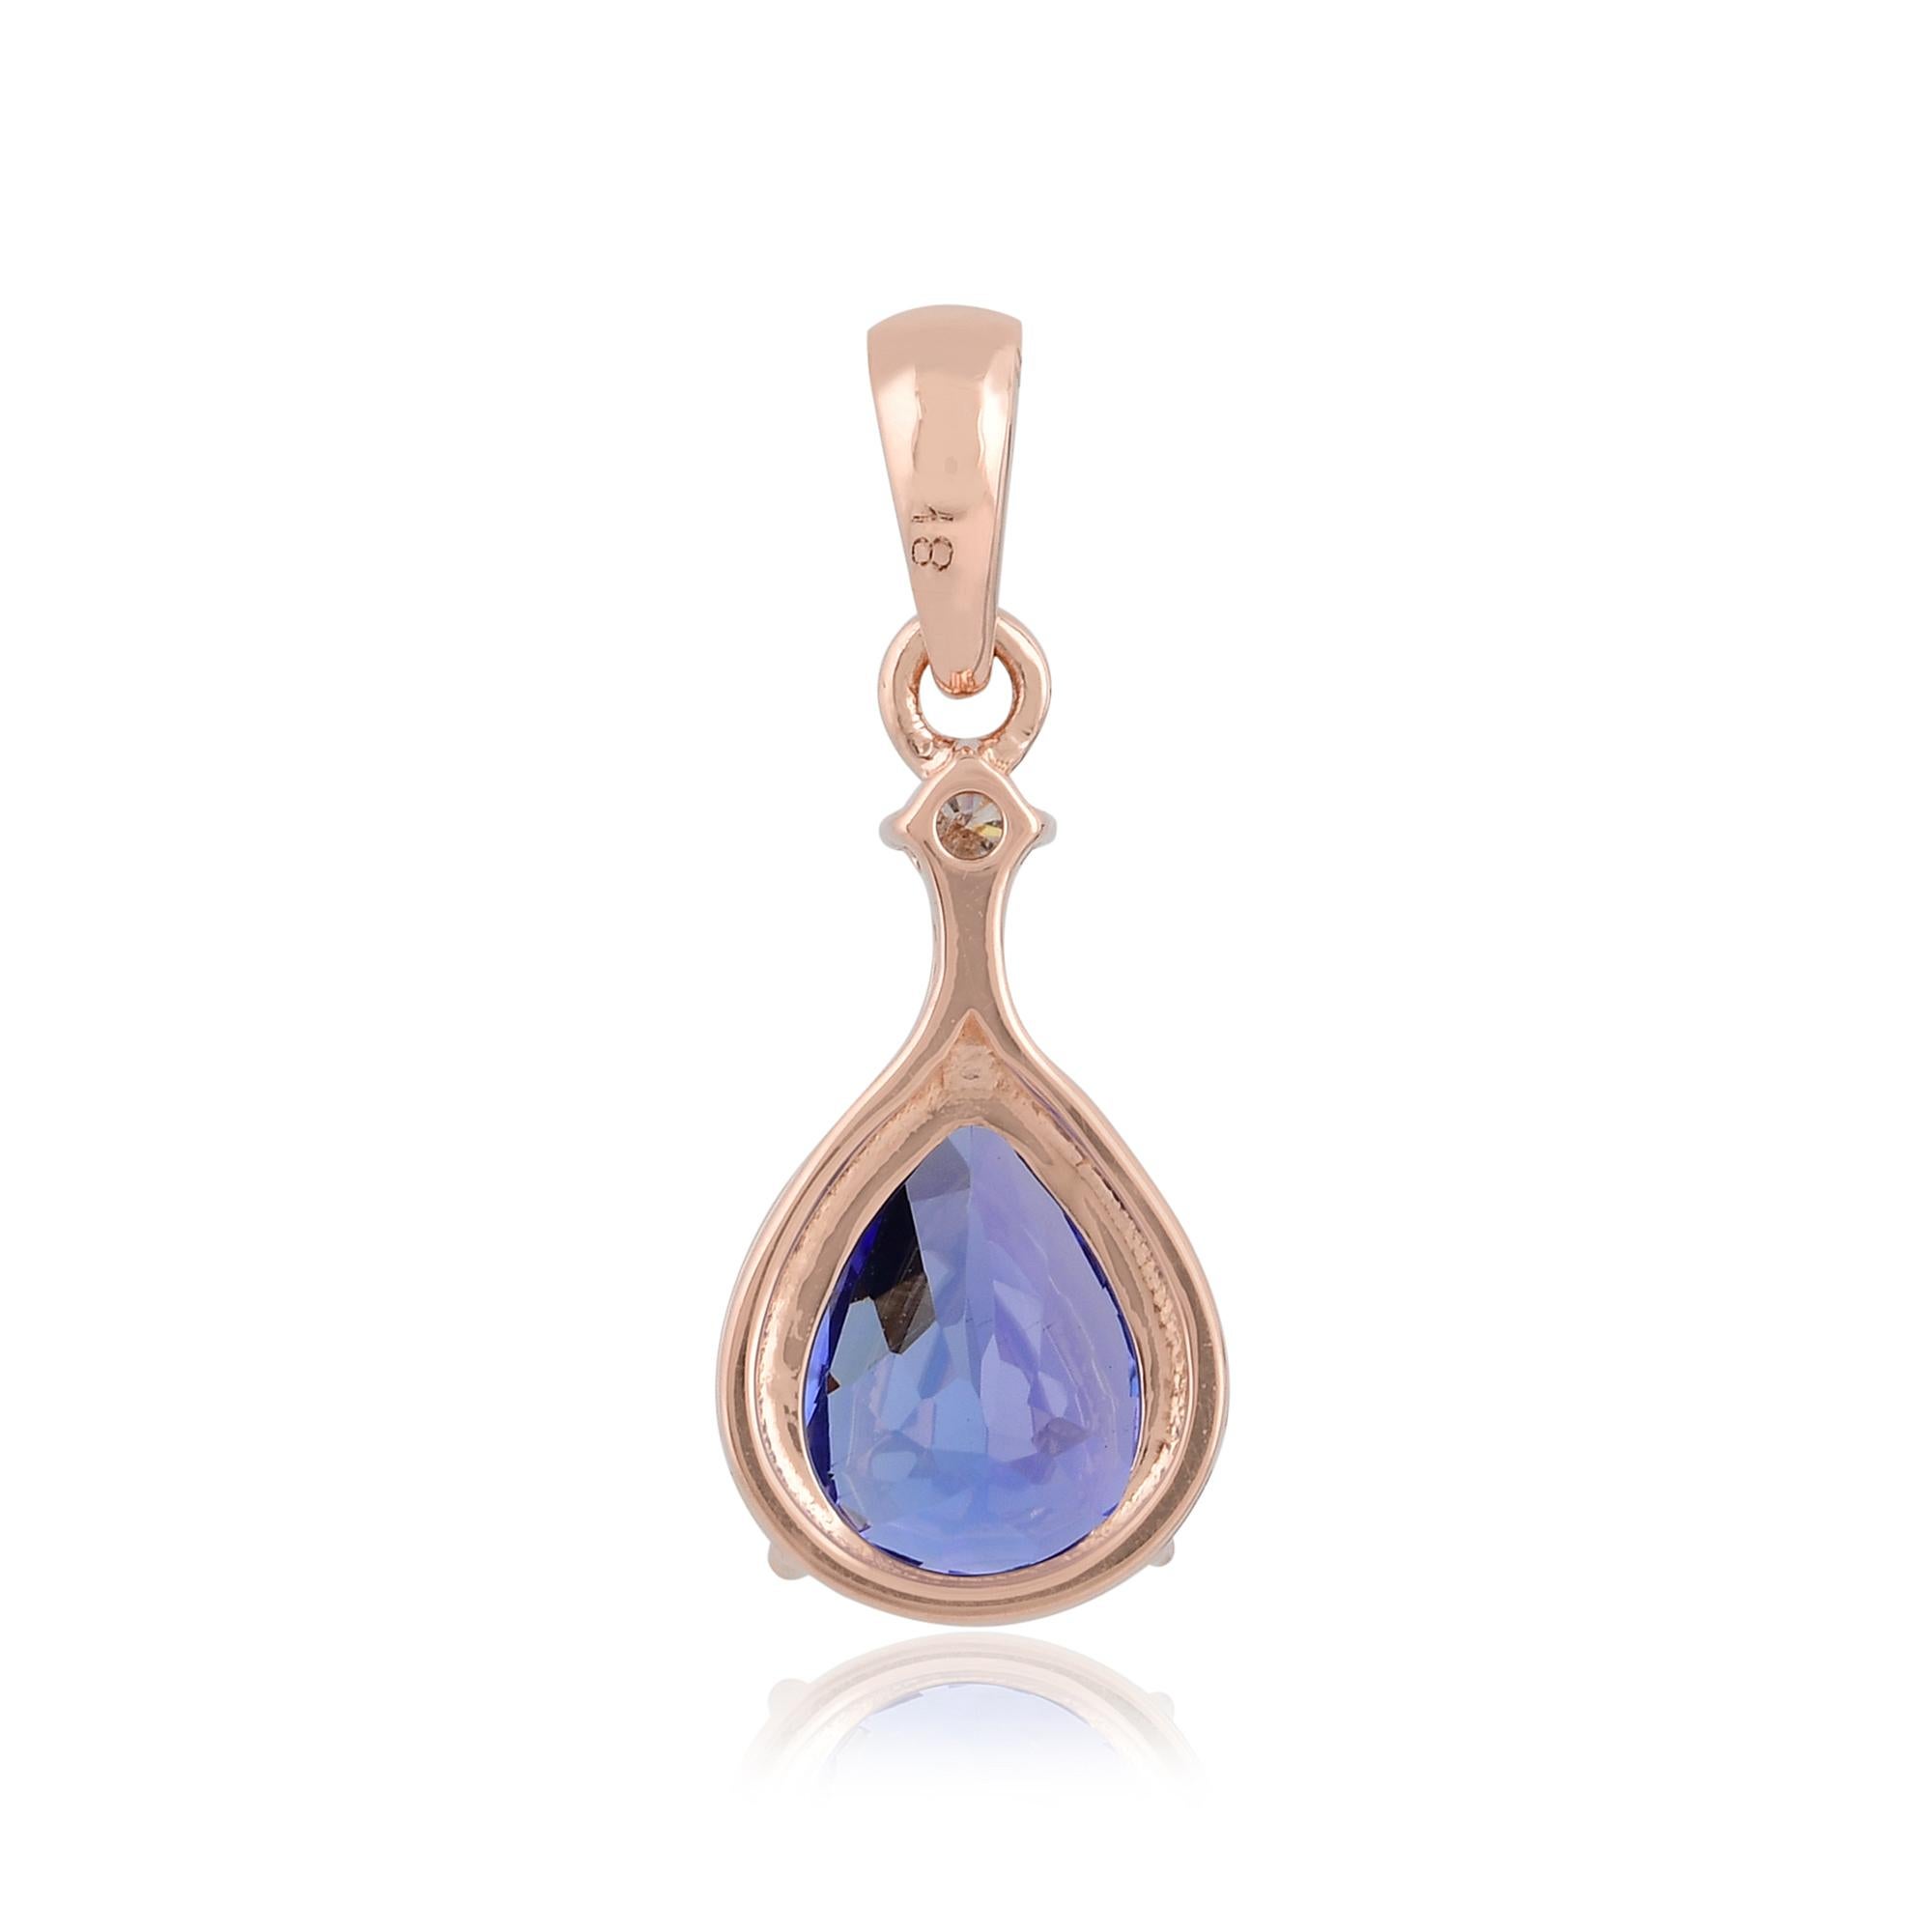 At the heart of this pendant is a captivating natural tanzanite gemstone, celebrated for its mesmerizing blue-violet hue. Each tanzanite gemstone is carefully hand-selected for its exceptional quality and color, displaying a rich and vibrant tone